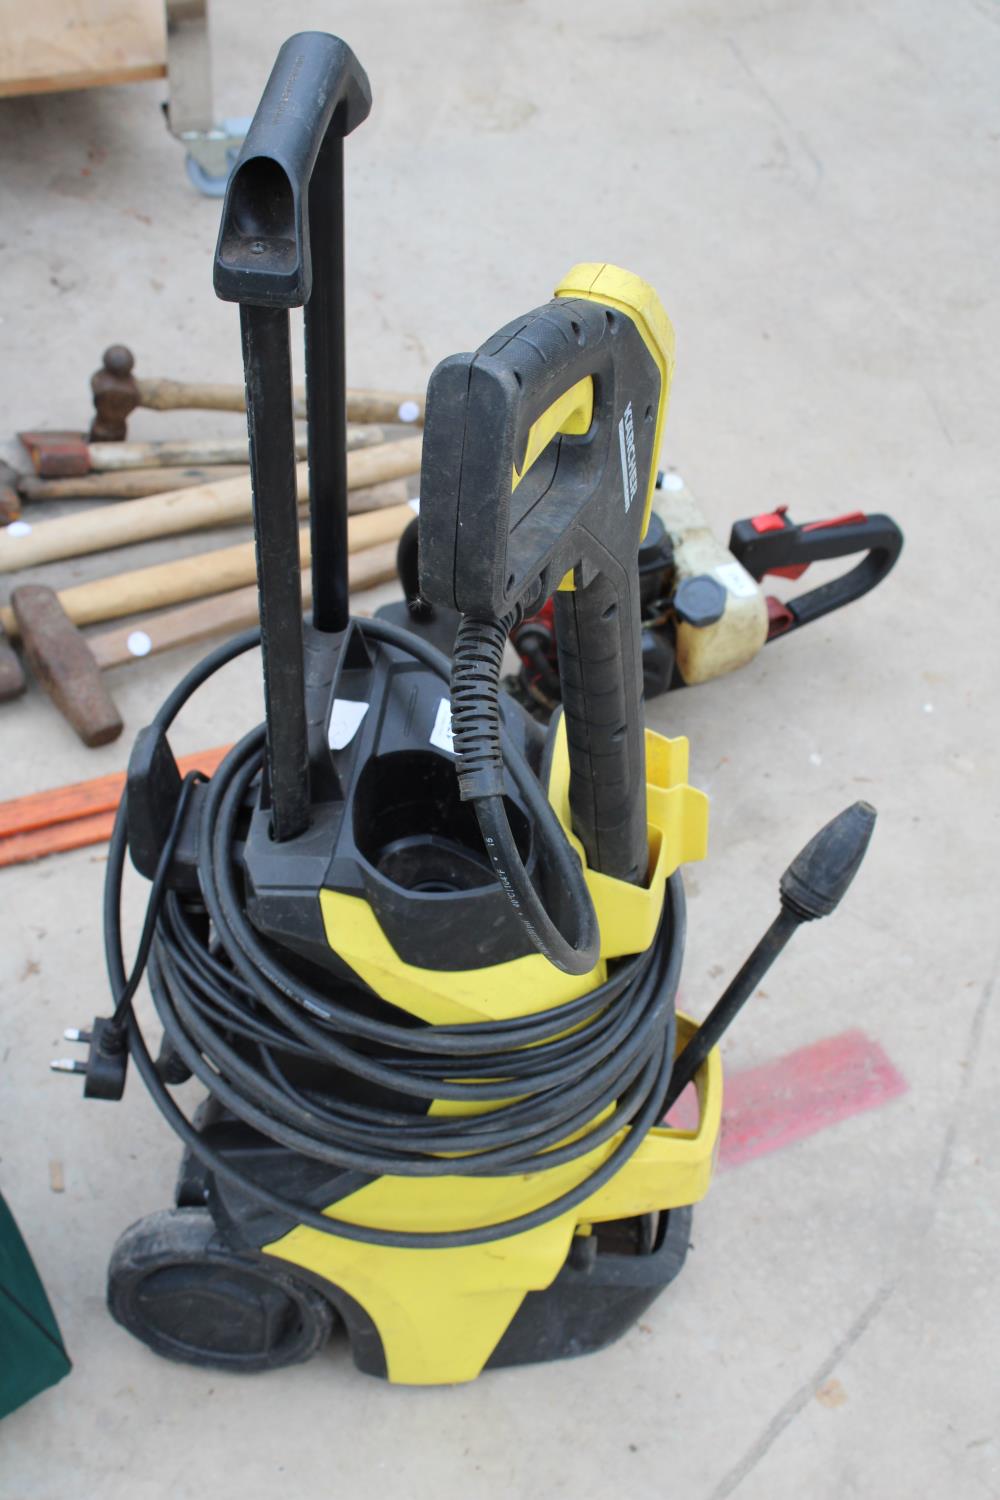 A KARCHER K4 POWER CONTROL PRESSURE WASHER - Image 2 of 2